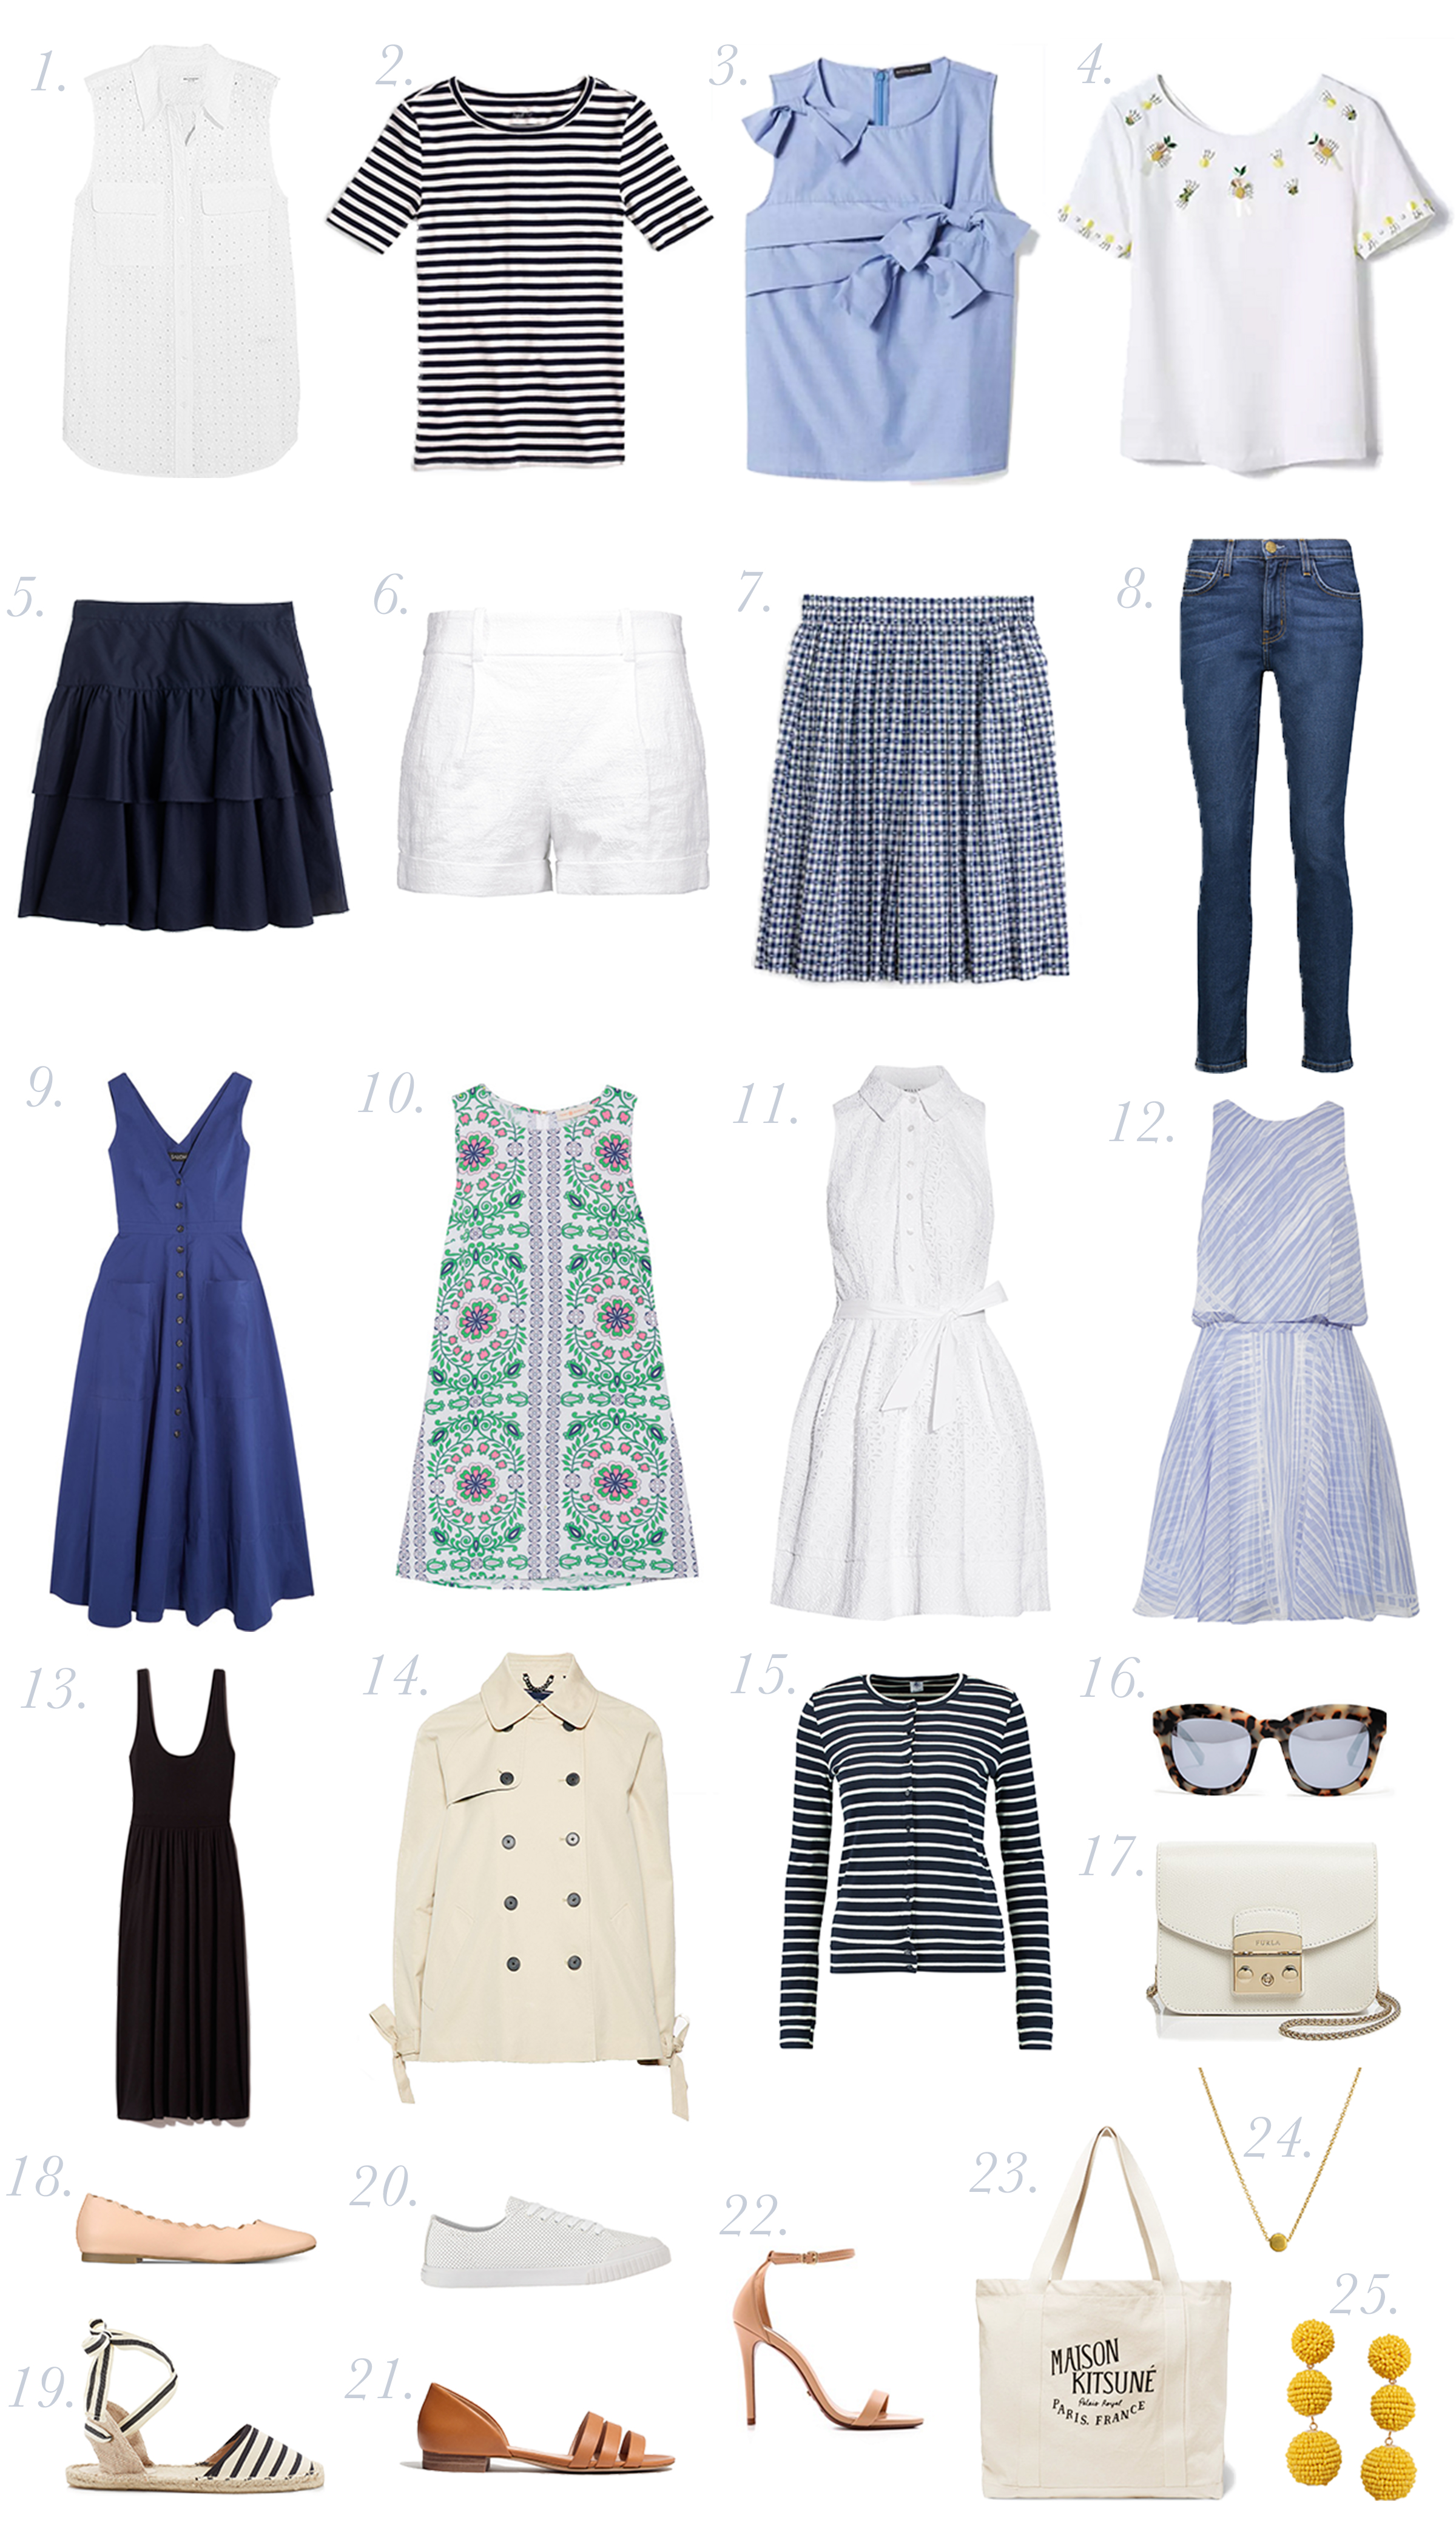 How to Pack for Europe: Spring &amp; Summer Capsule Wardrobe | How I packed a 25-item capsule wardrobe for 12 weeks in Europe, and what to wear in France and Italy | Packing Light | Travel Tips | Carry-On Packing